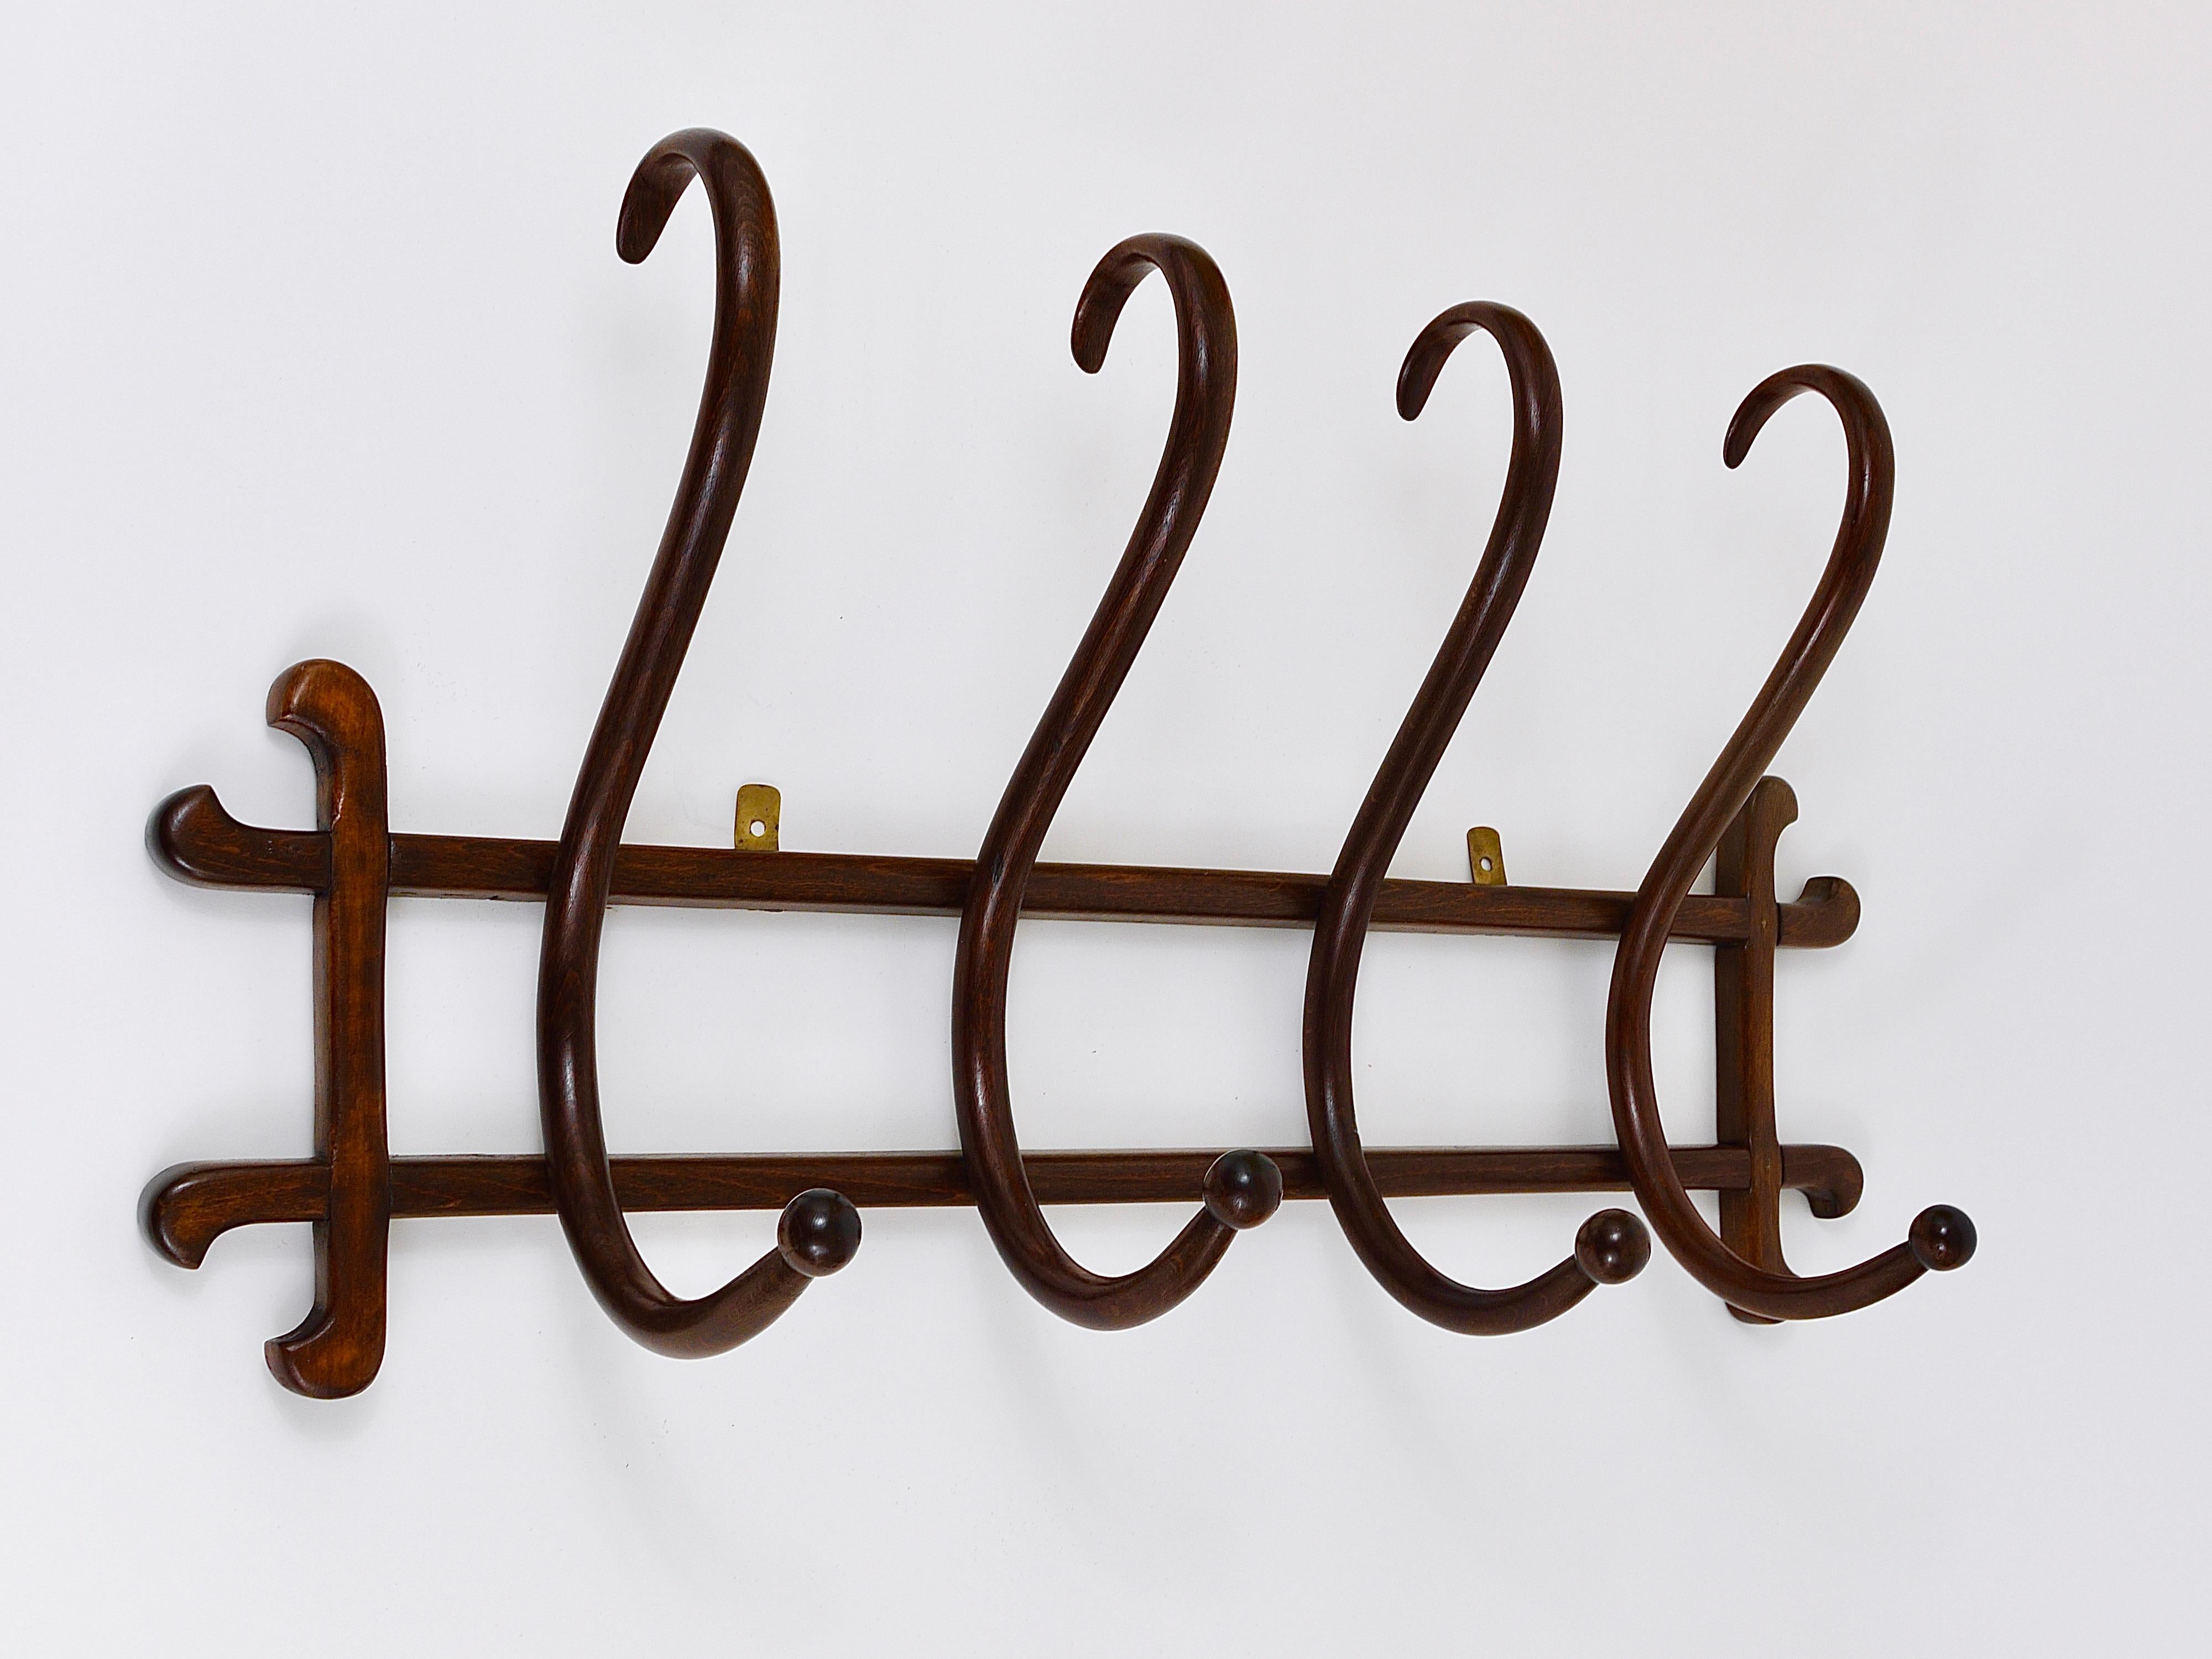 1900s Thonet Art Nouveau Secession Bentwood Wall Coat Rack with four Hangers 4